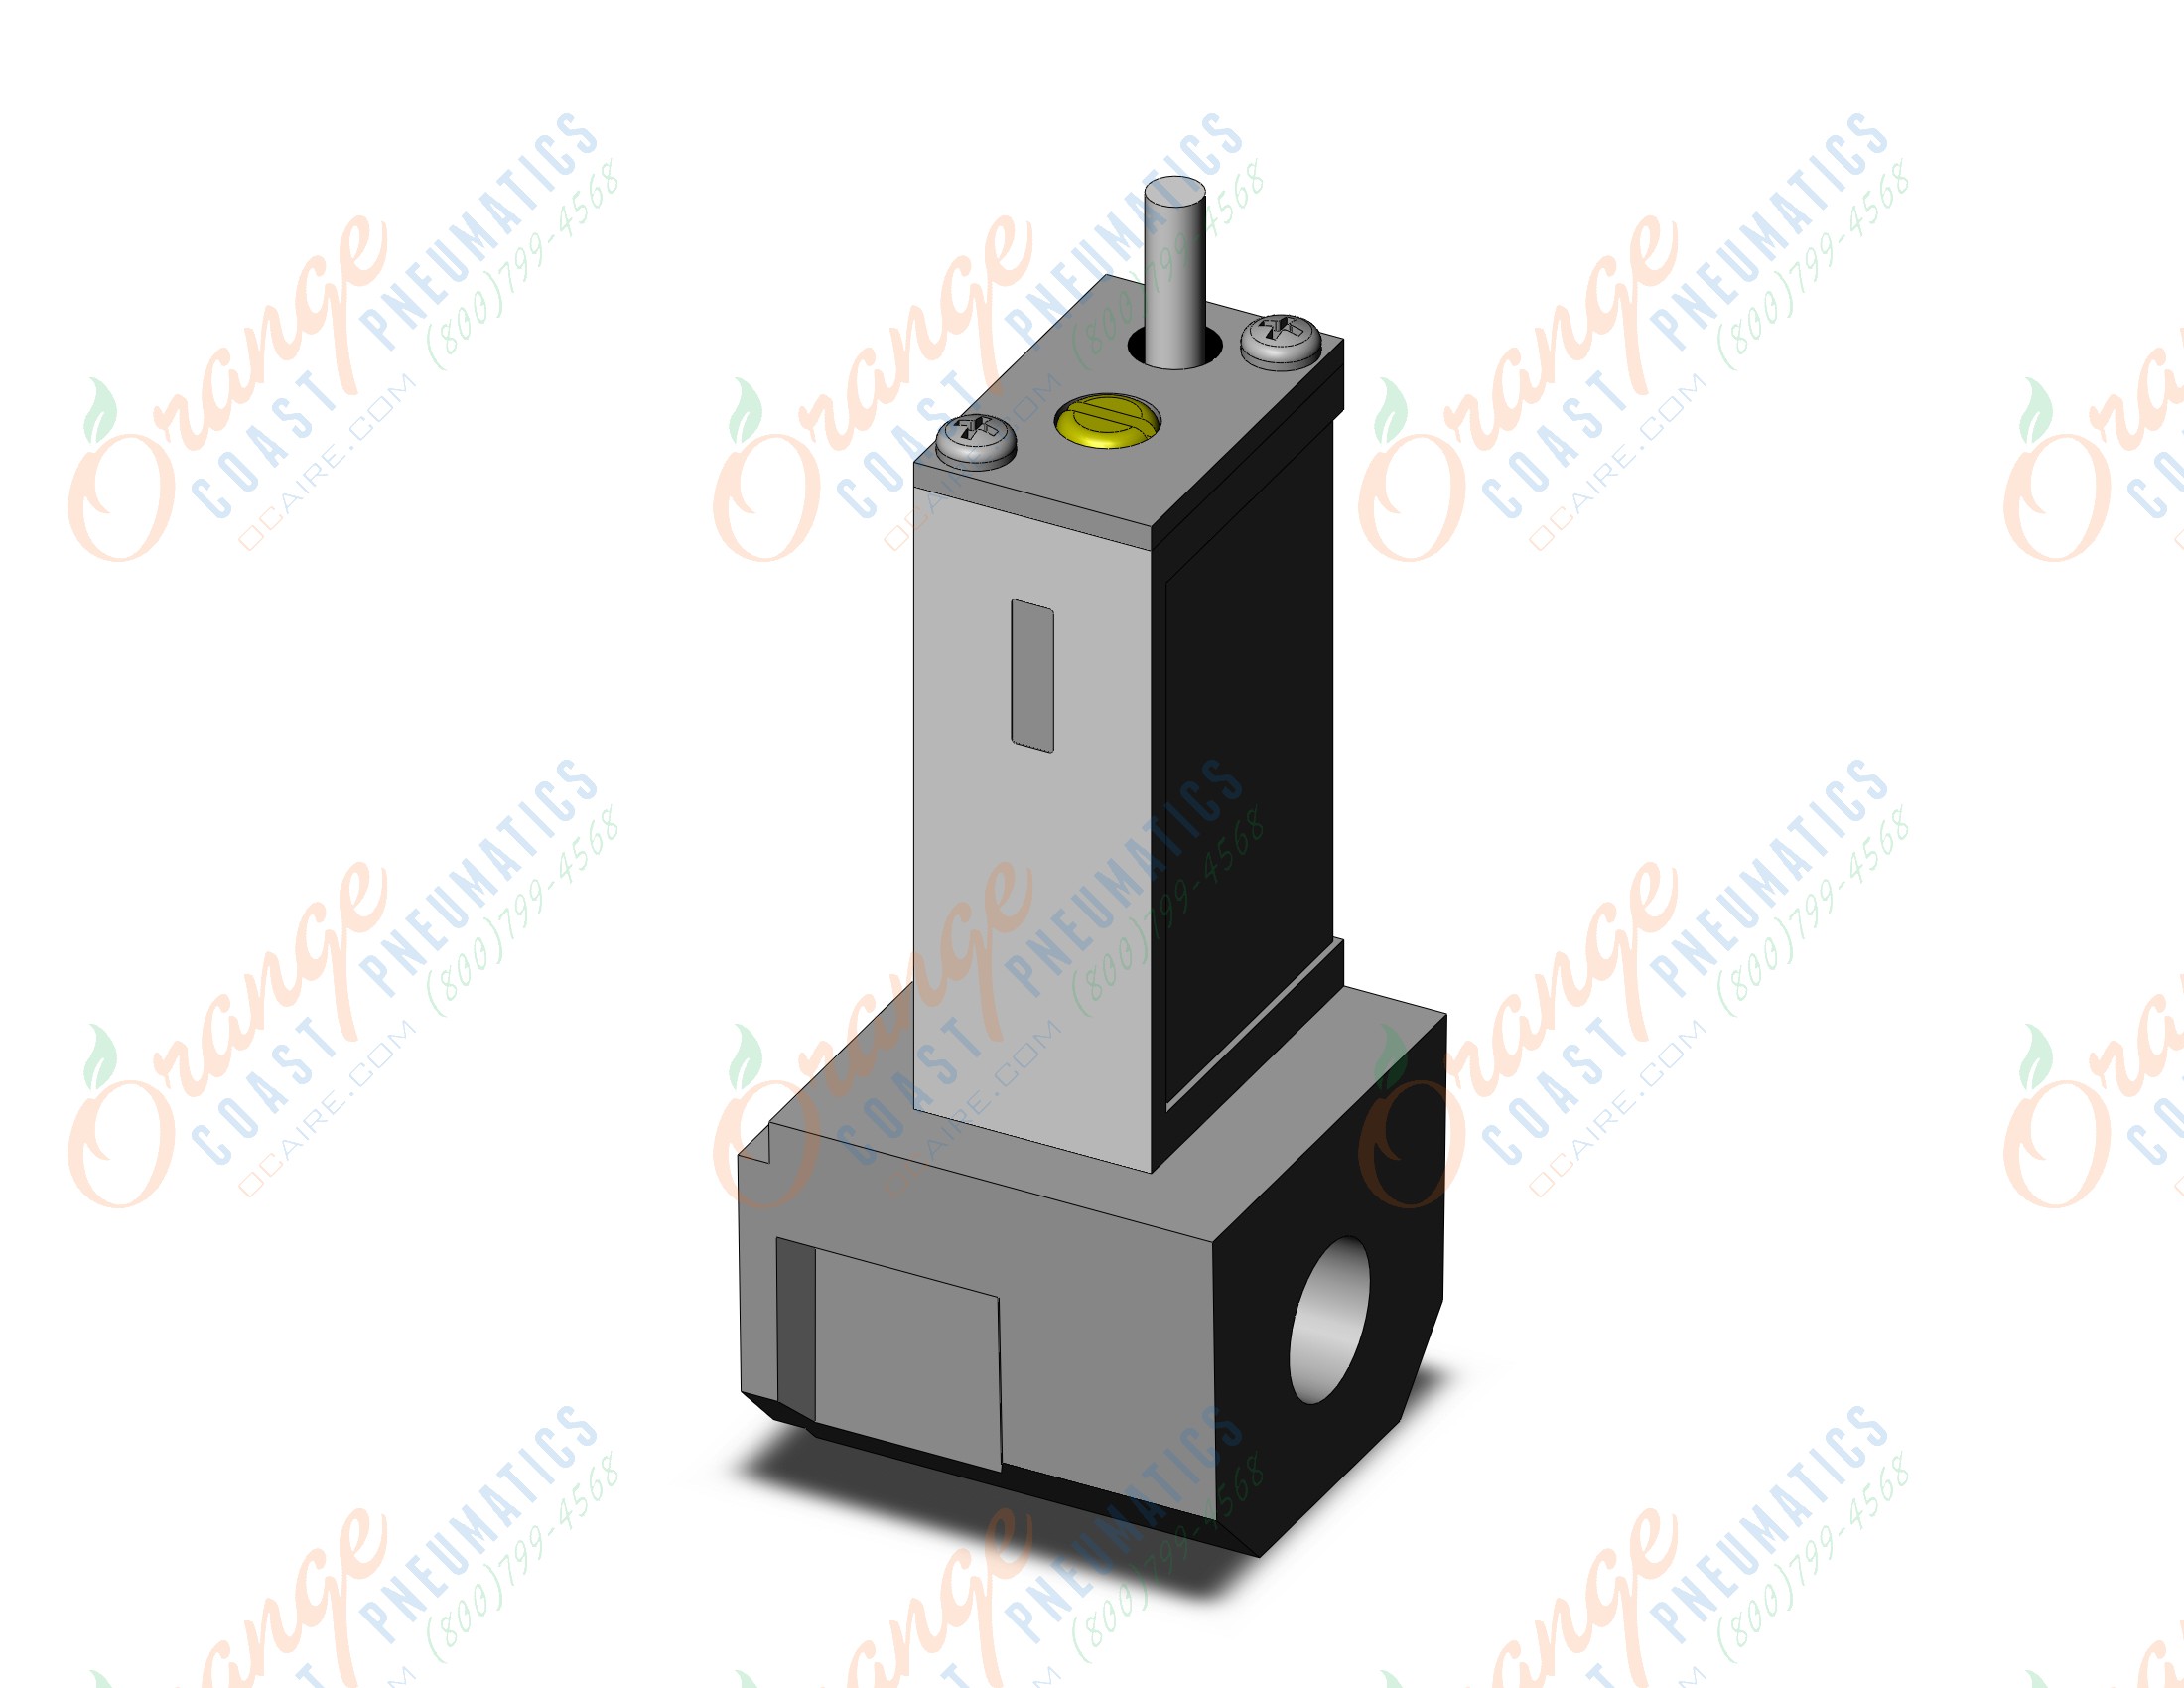 SMC IS10E-20N01-A pressure switch w/piping adapter, PRESSURE SWITCH, IS ISG